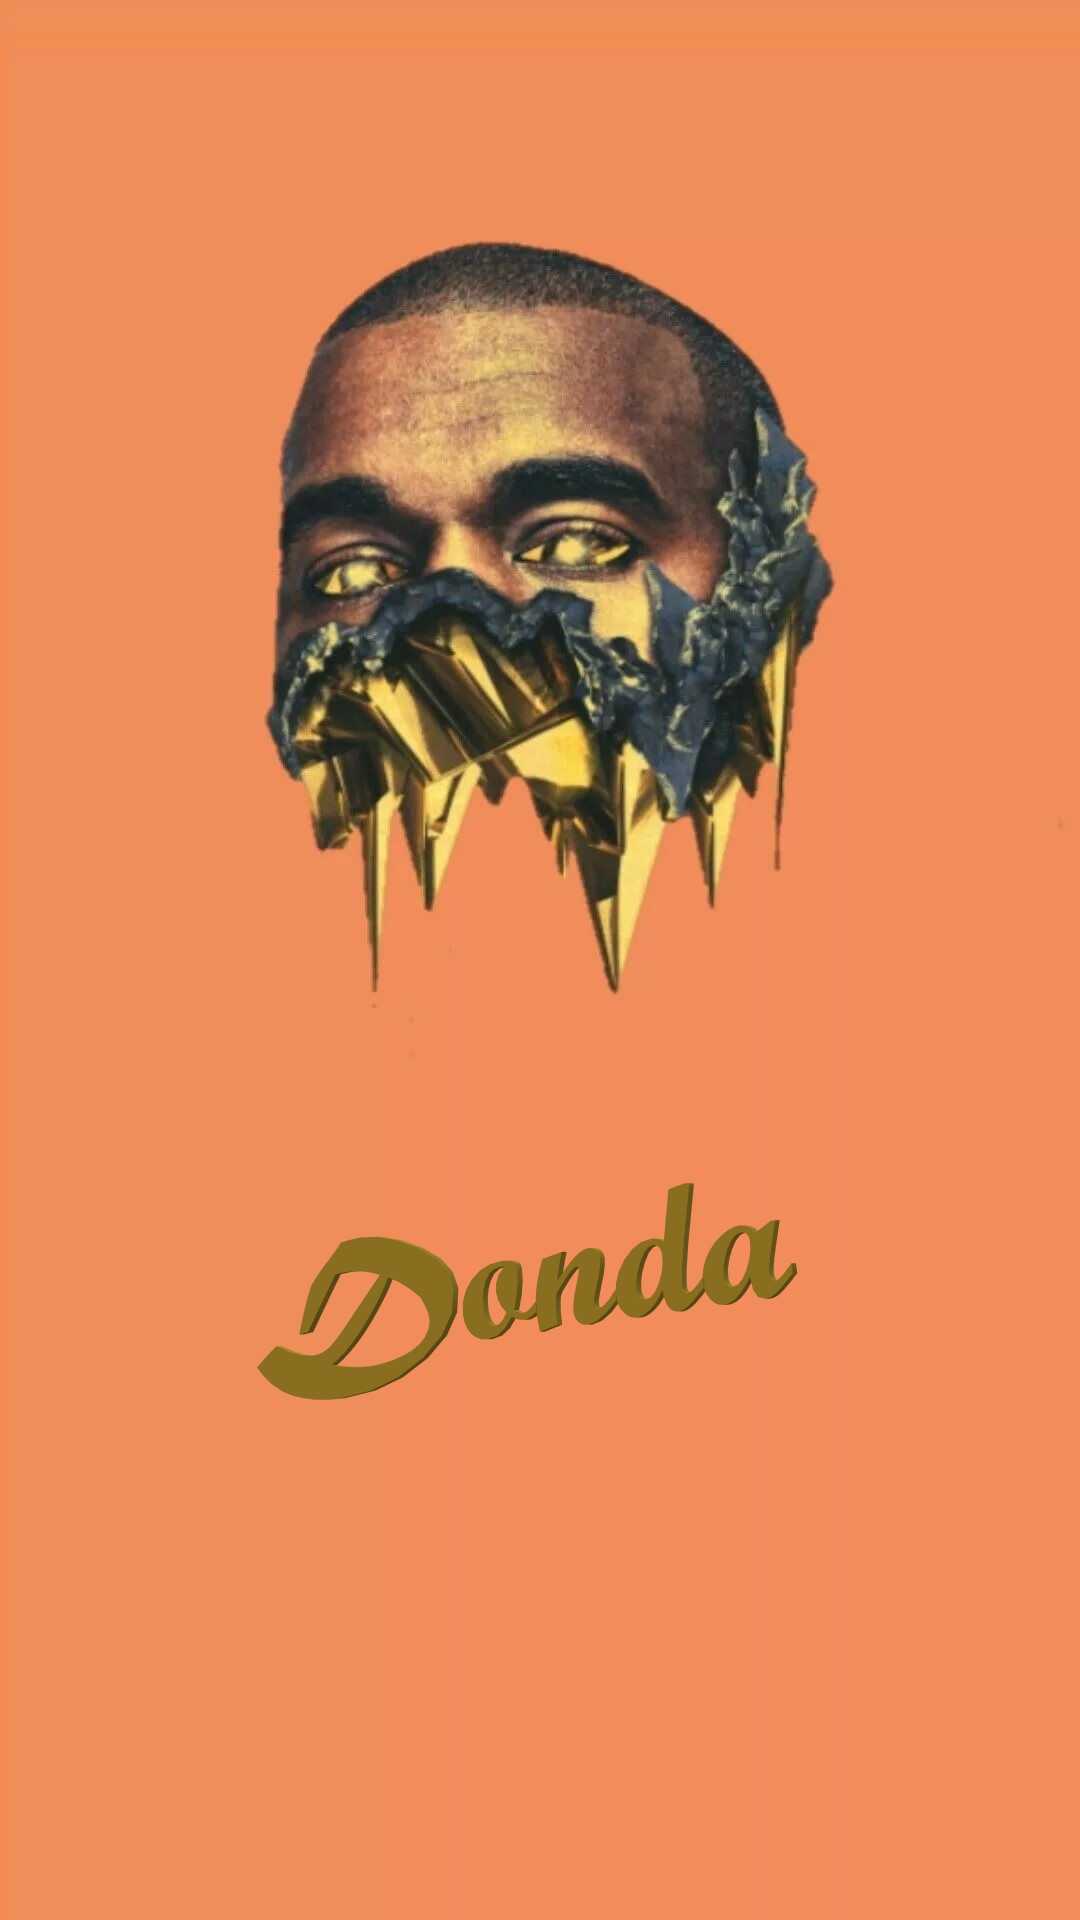 Donda Kanye West Wallpapers   KoLPaPer   Awesome HD Wallpapers 1080x1920